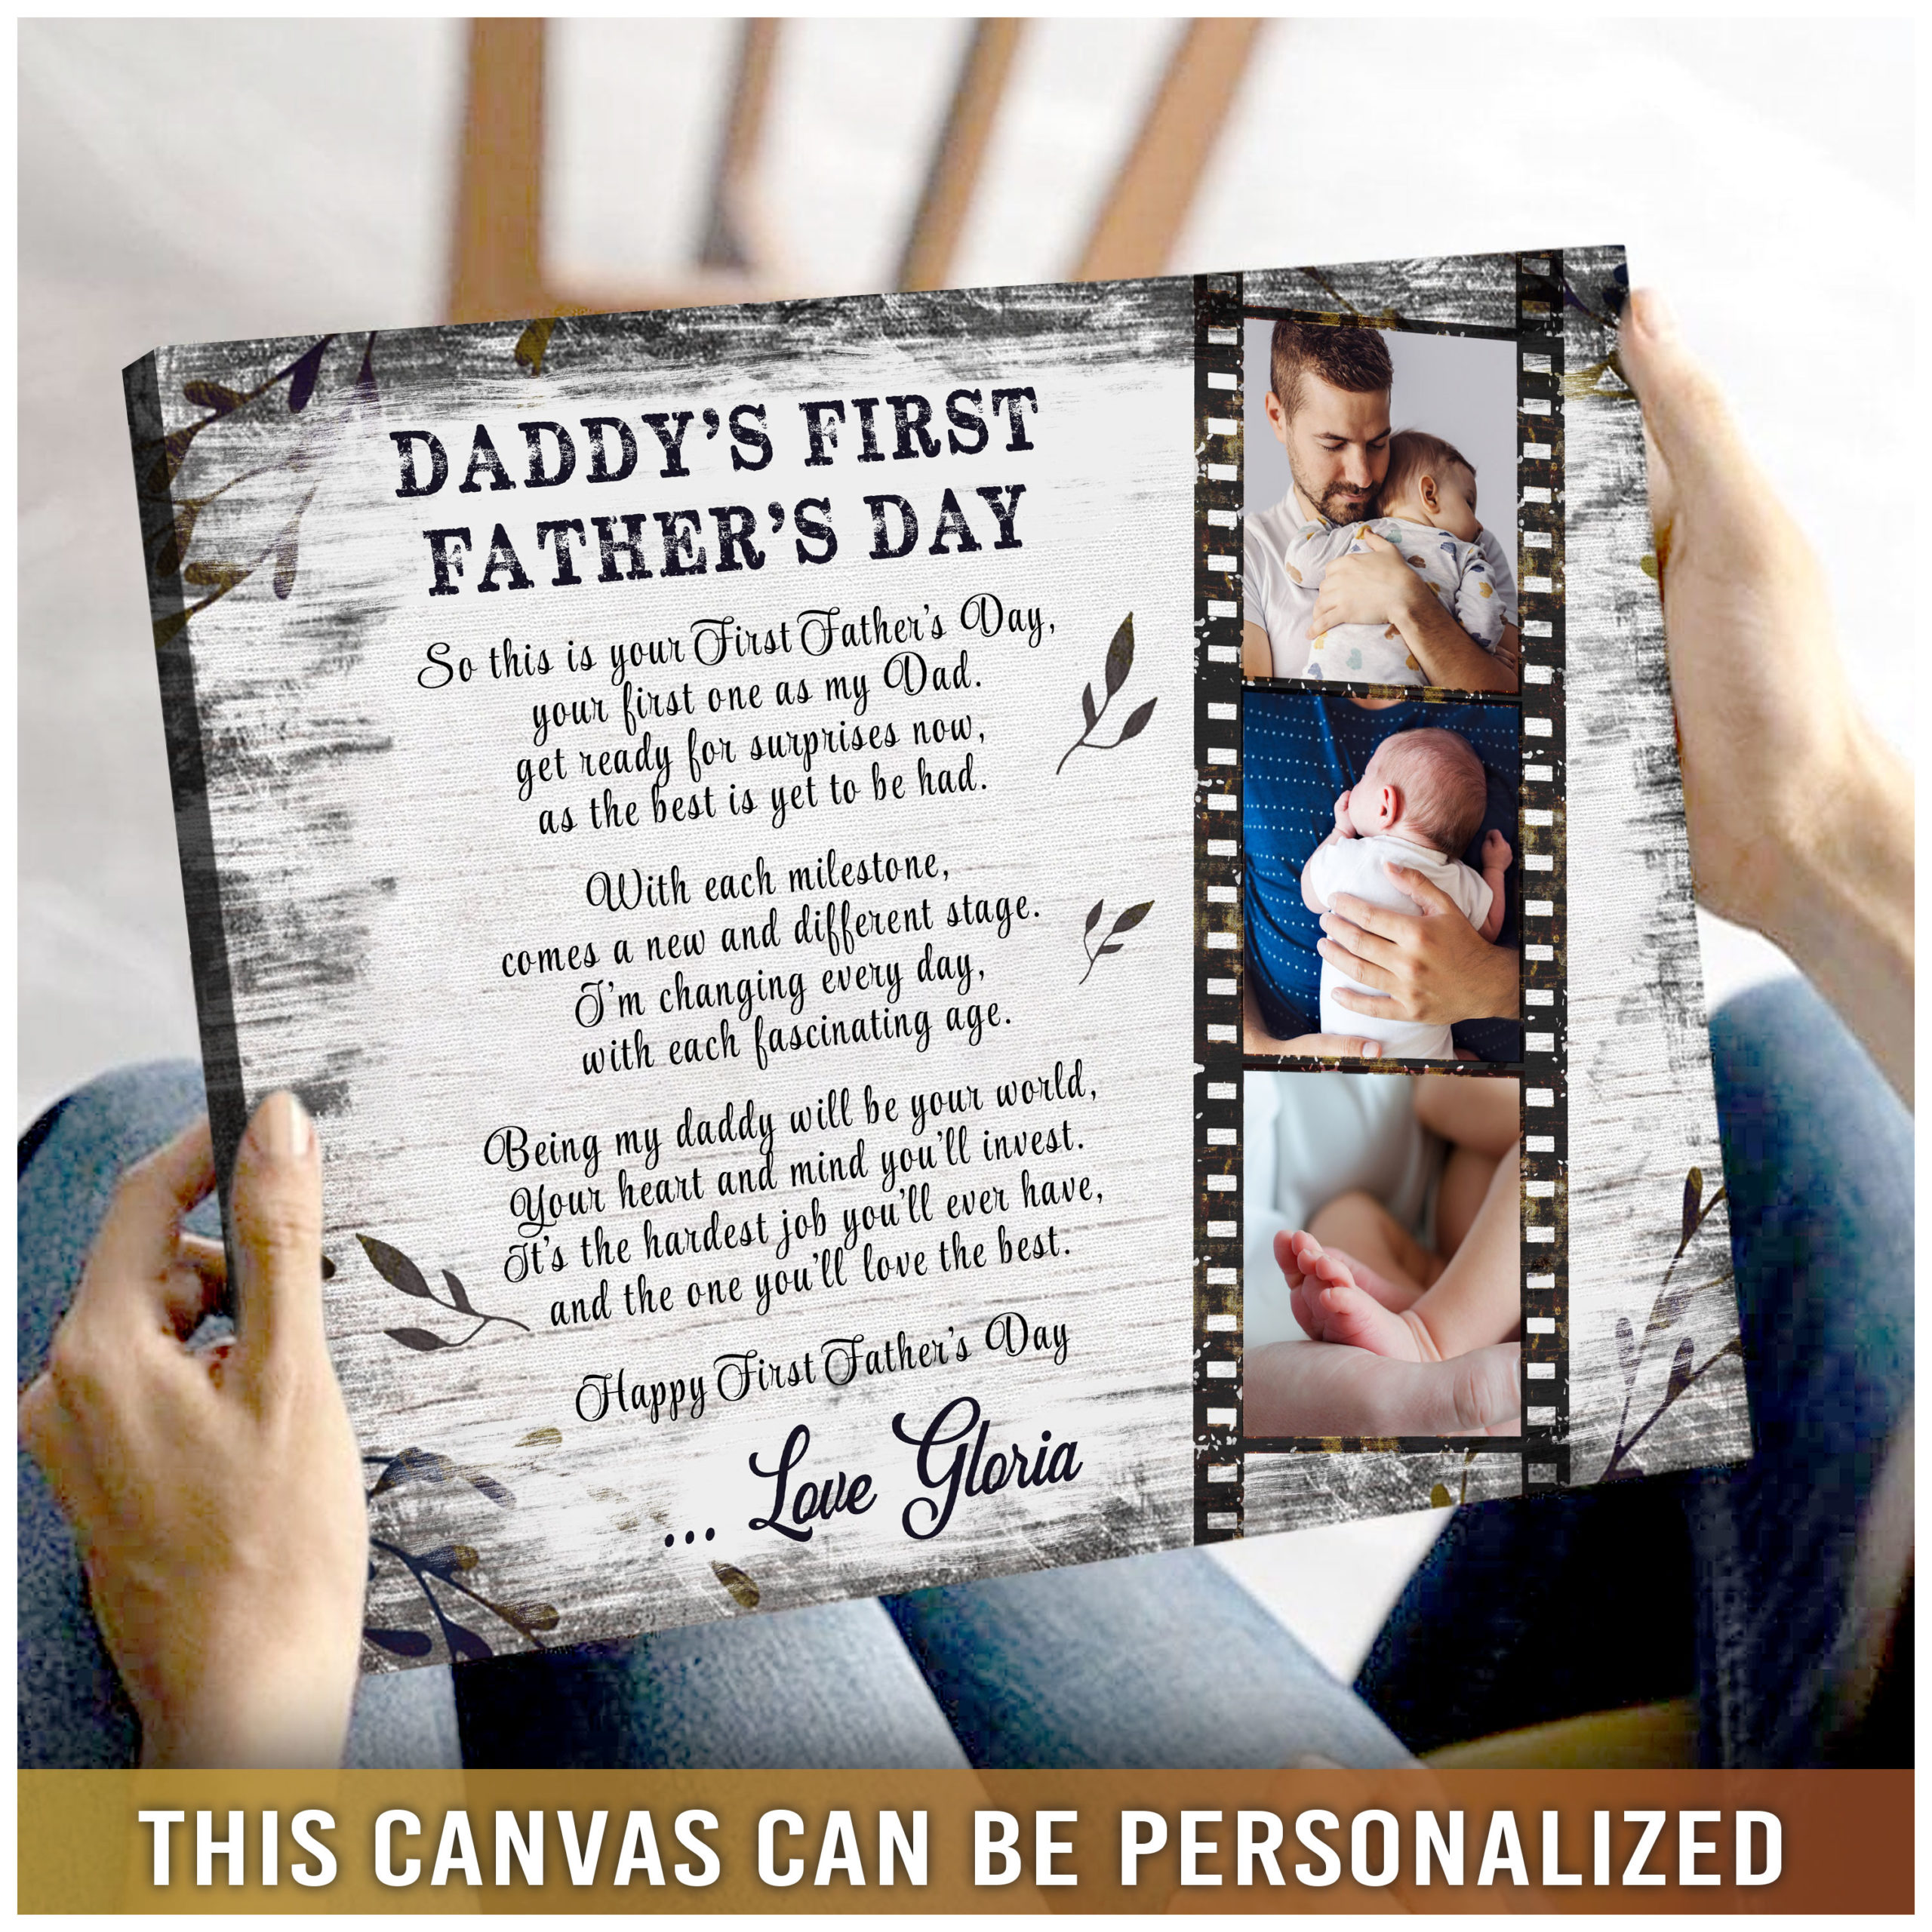 dad gift from kids custom photo canvas personalized first father's day 02